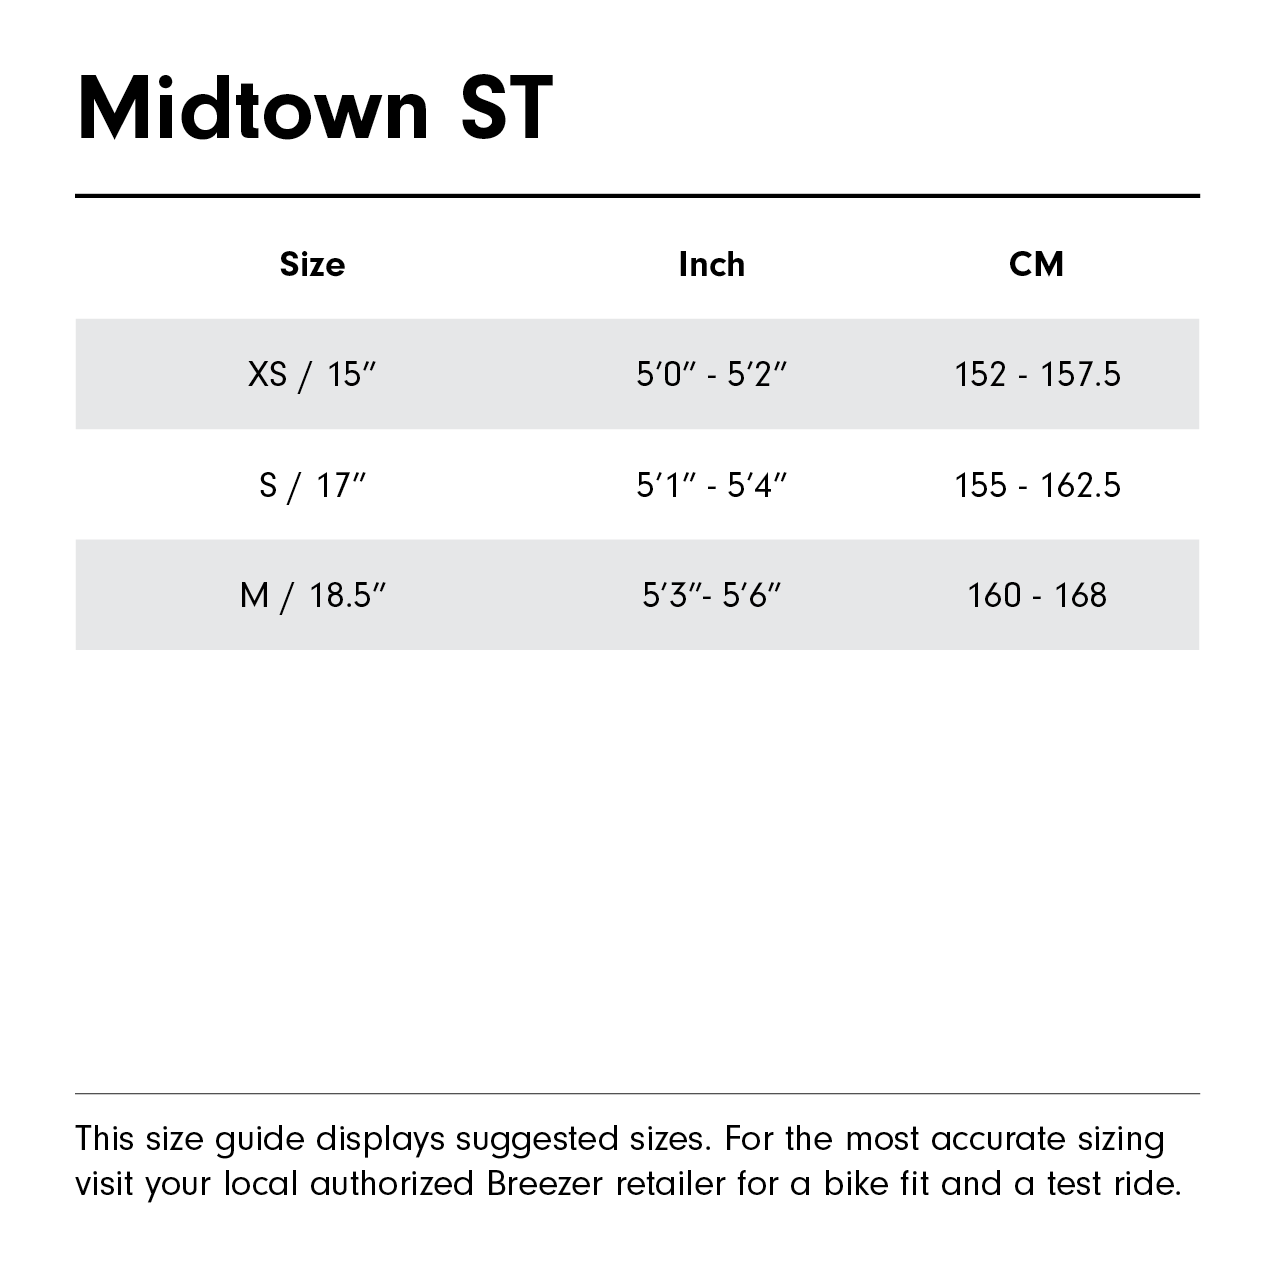 Midtown ST Size Guide